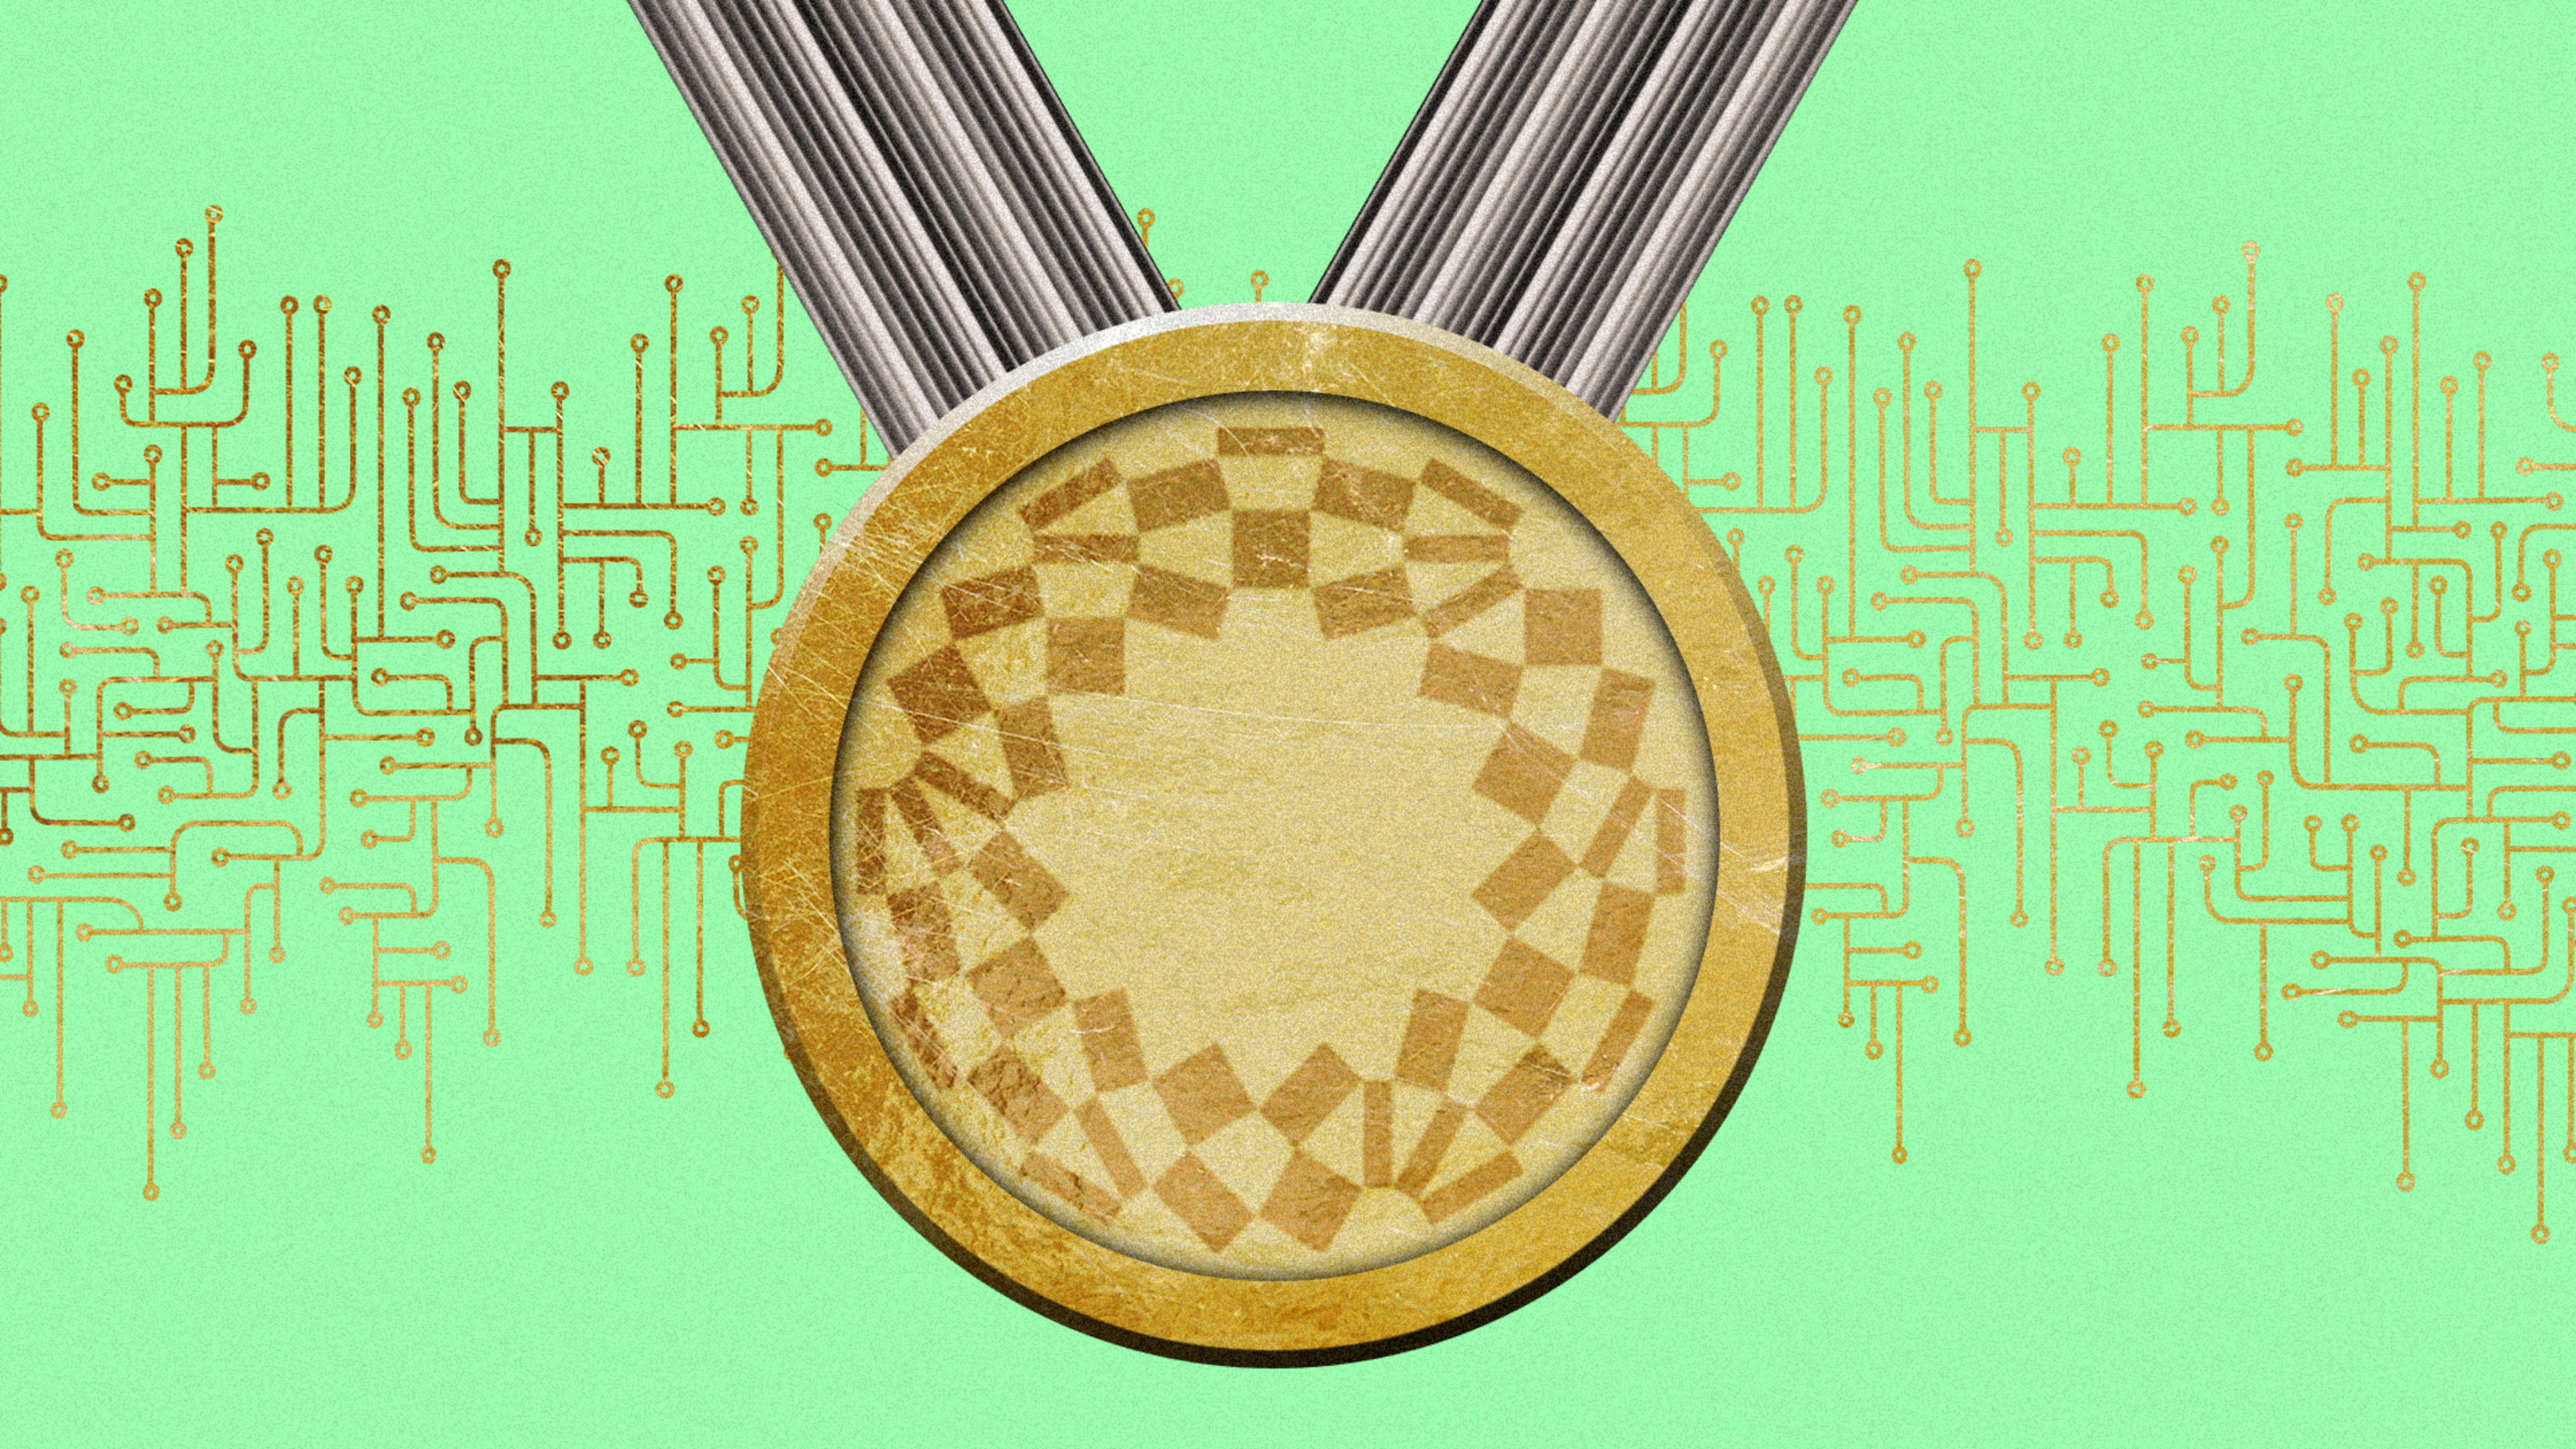 Tokyo’s Olympic medals are made from 47 tons of recycled electronics